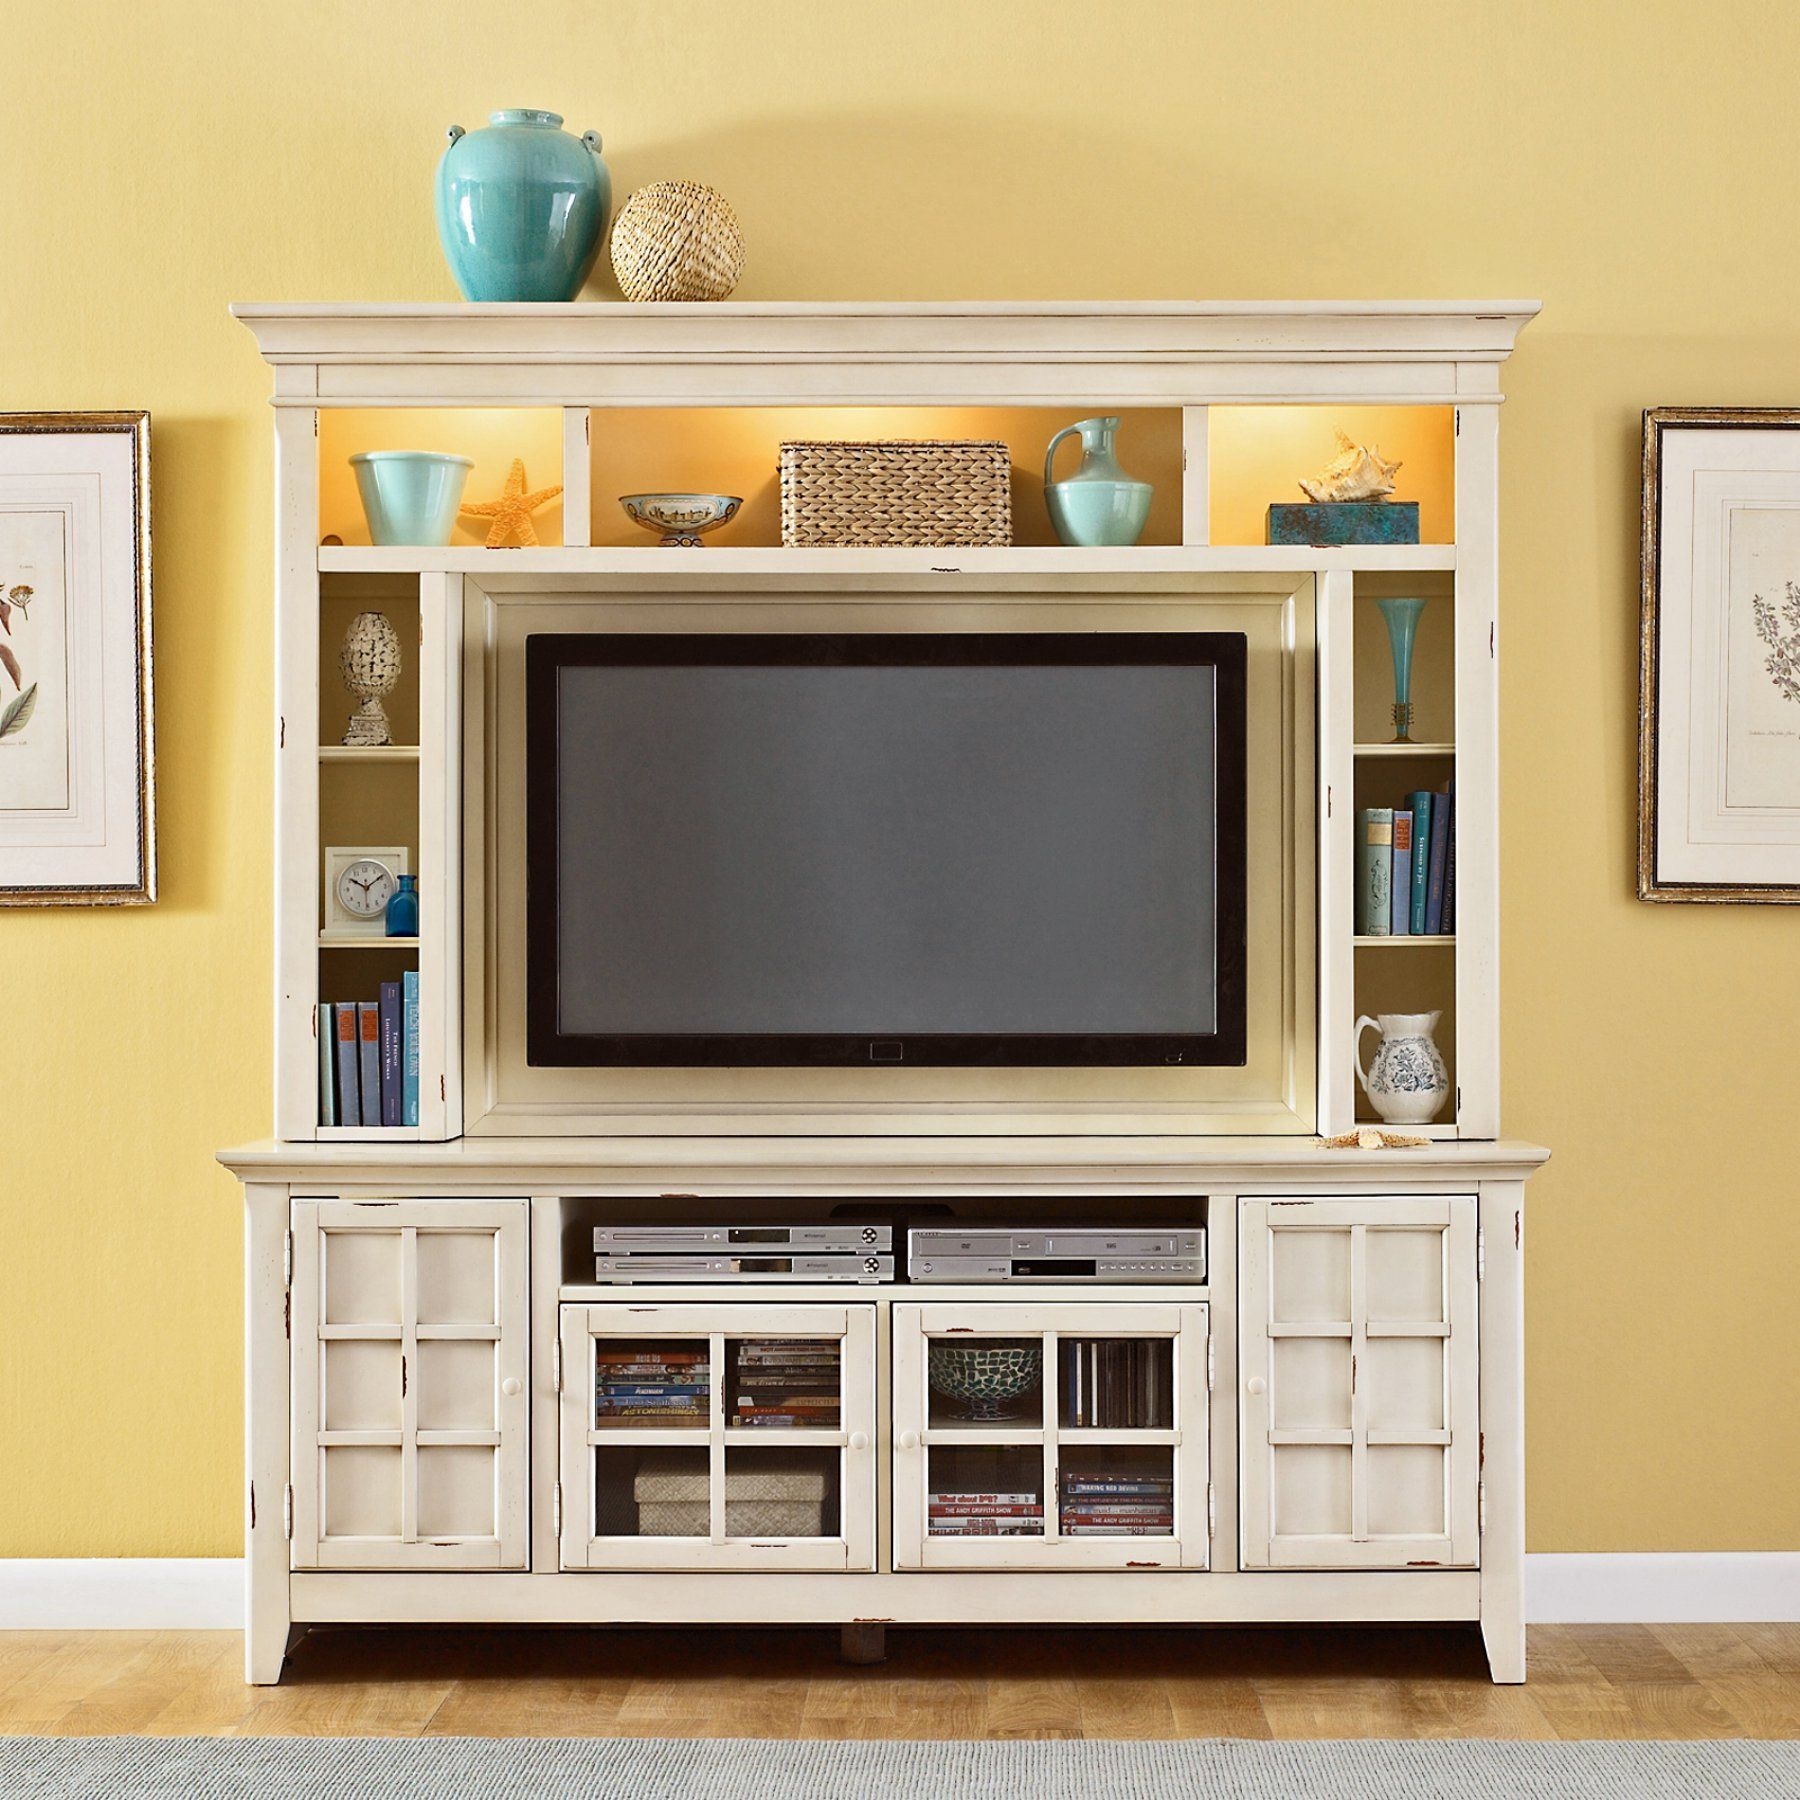 Enclosed tv cabinets for flat screens